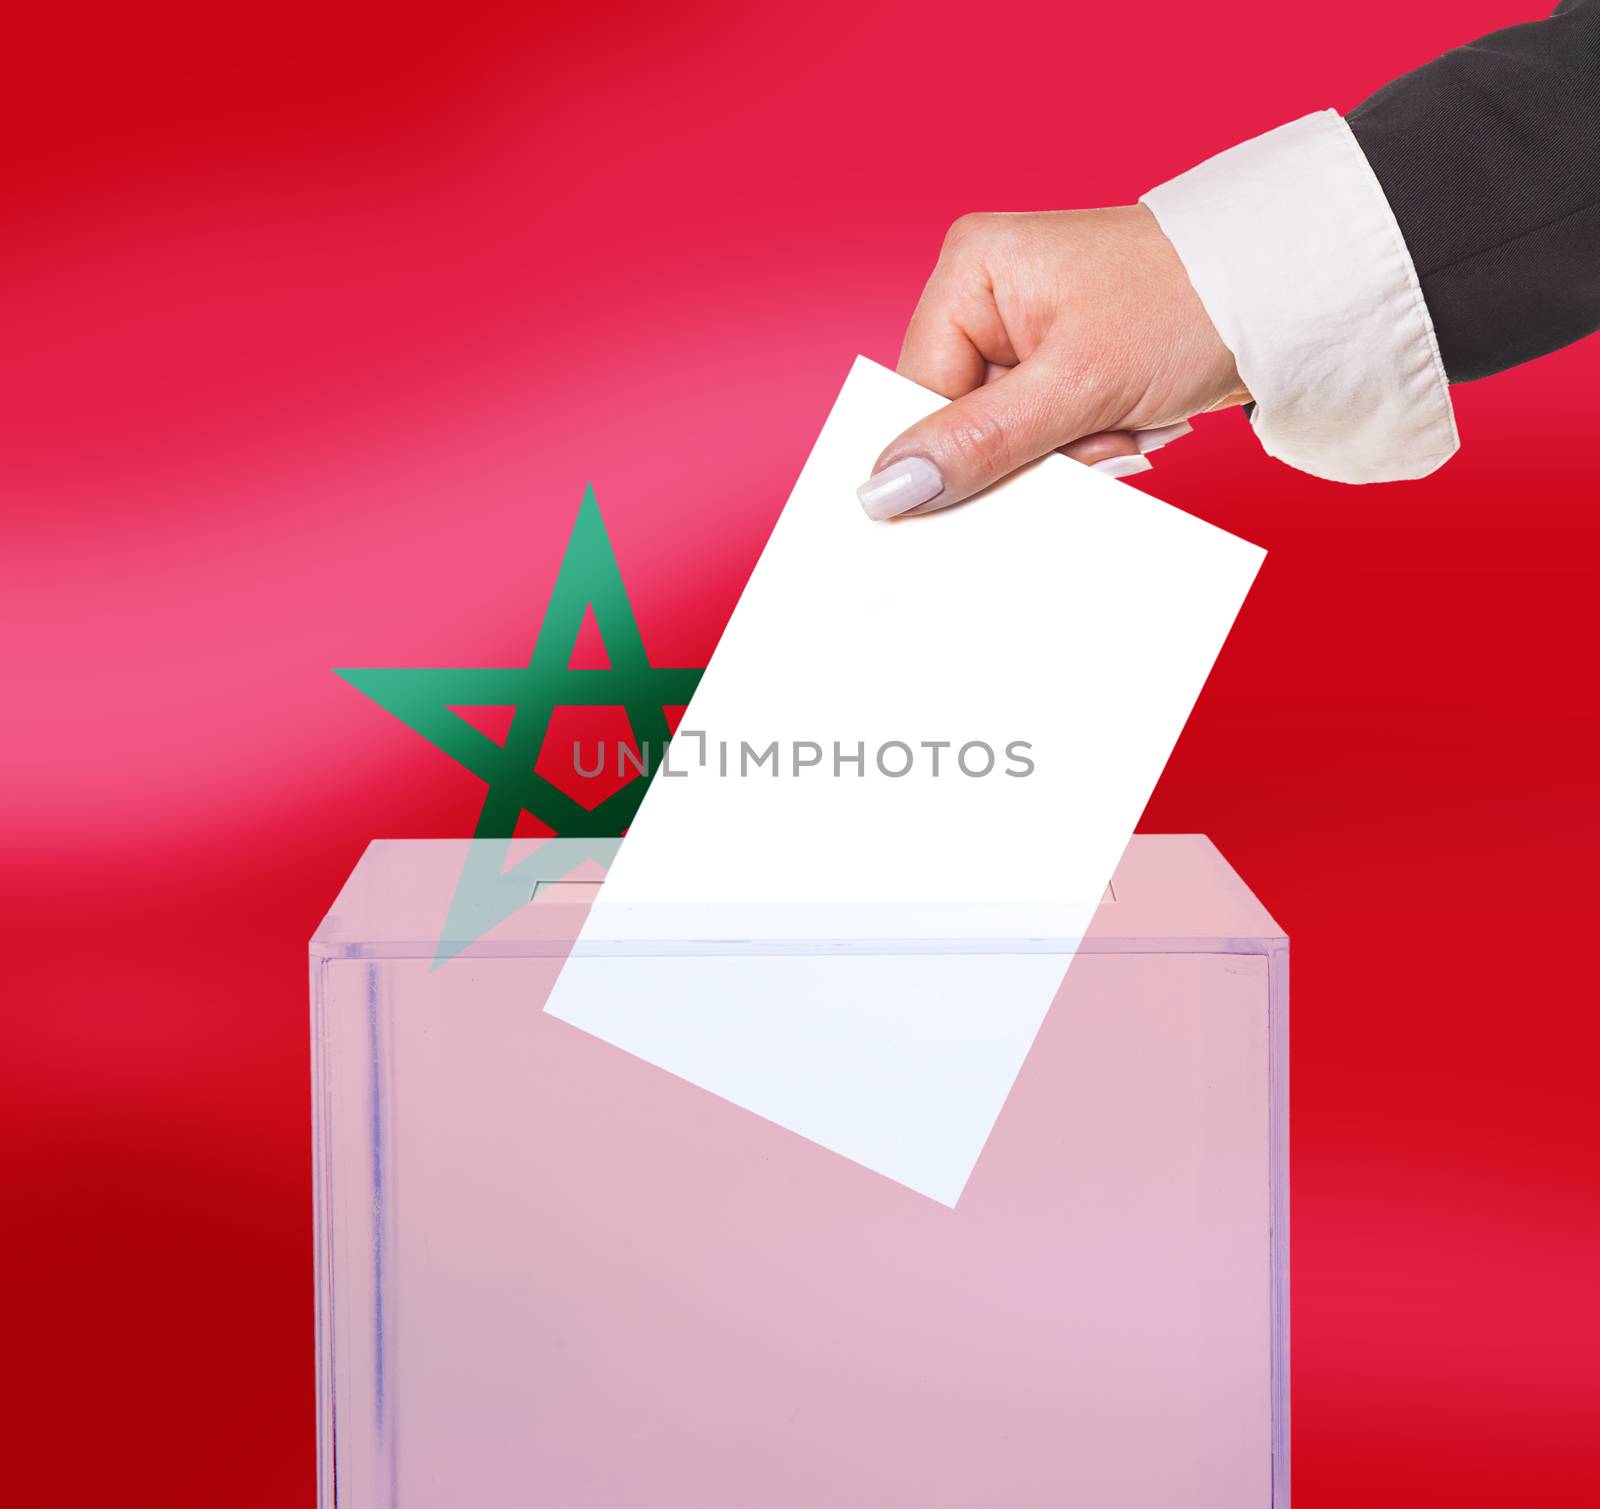 electoral vote by ballot, under the Morocco flag